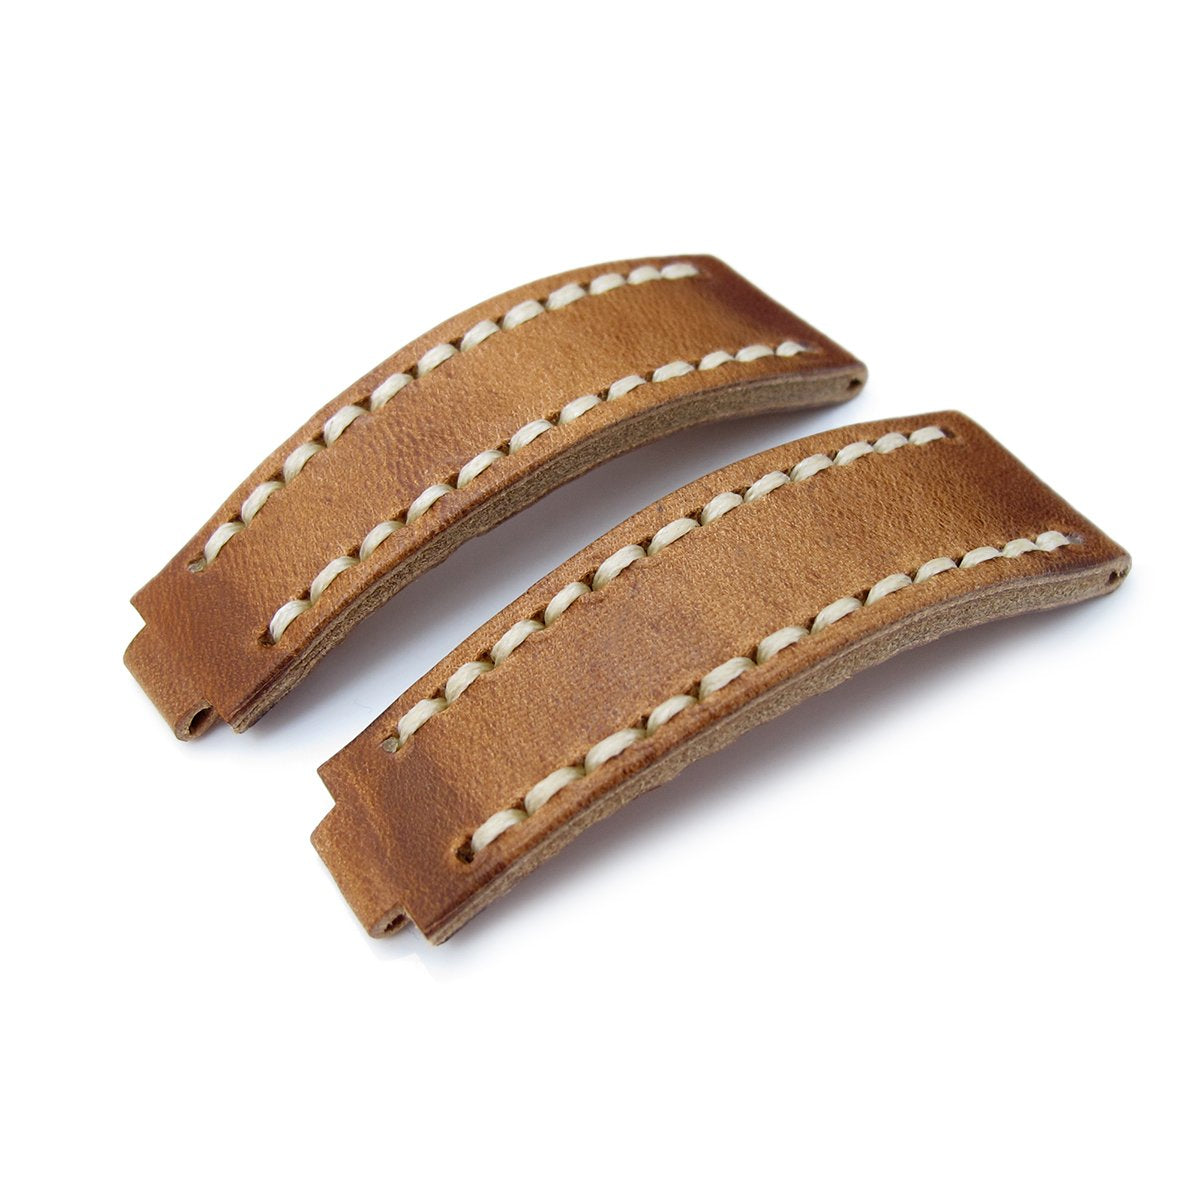 20mm MiLTAT RX Collection 'X' Watch Strap Matte Brown Pull Up Leather Beige St. Tailor-made for RX SUB & EXP Strapcode Watch Bands